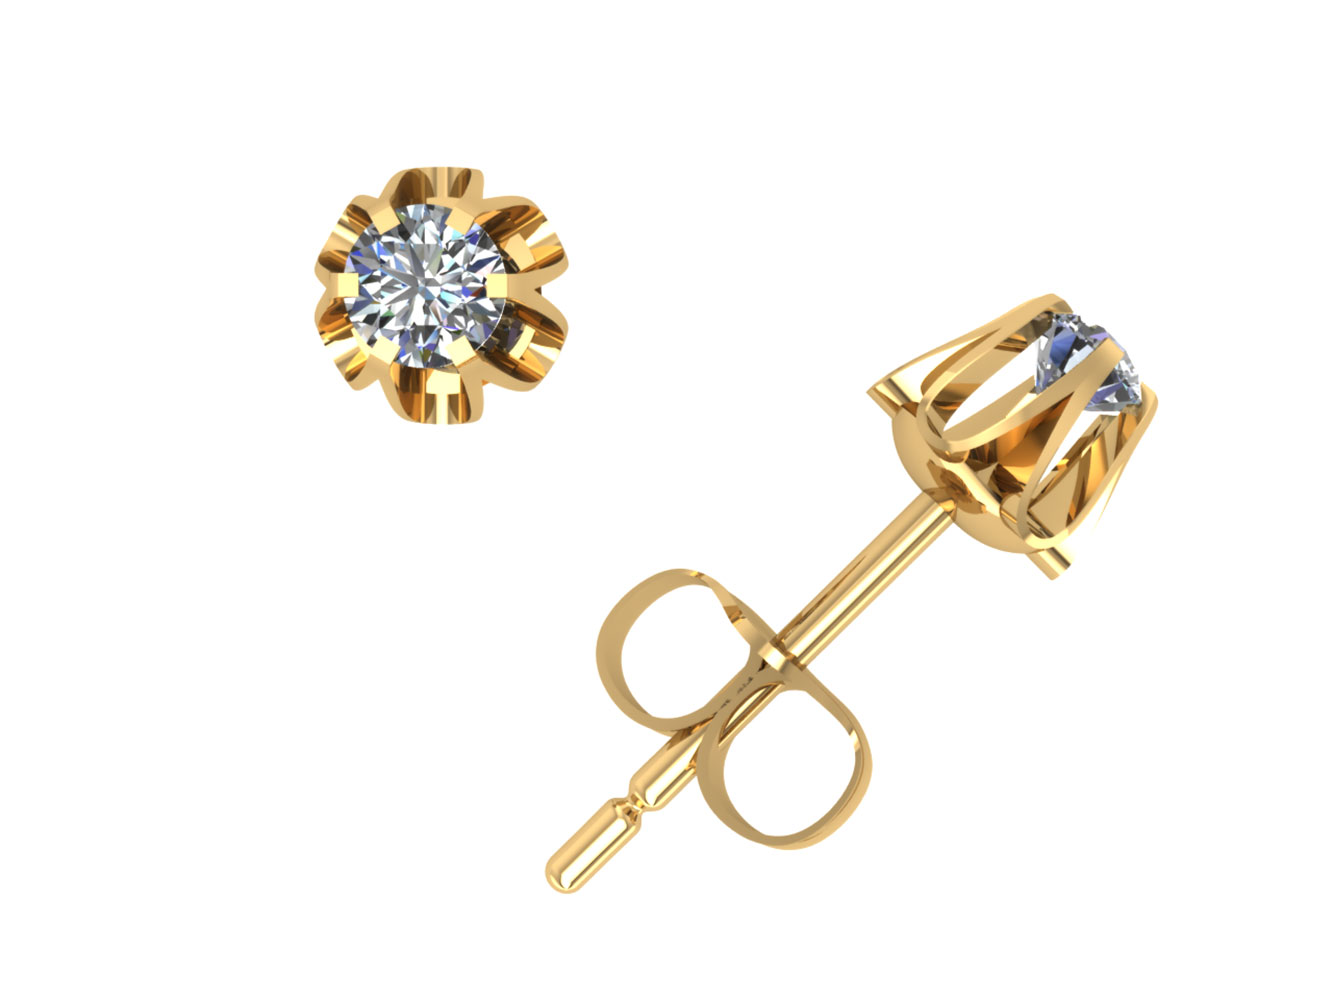 Jewel We Sell 0.10Ct Round Cut Diamond Buttercup Stud Earrings 14Karat White or Yellow Gold 6Prong H SI2